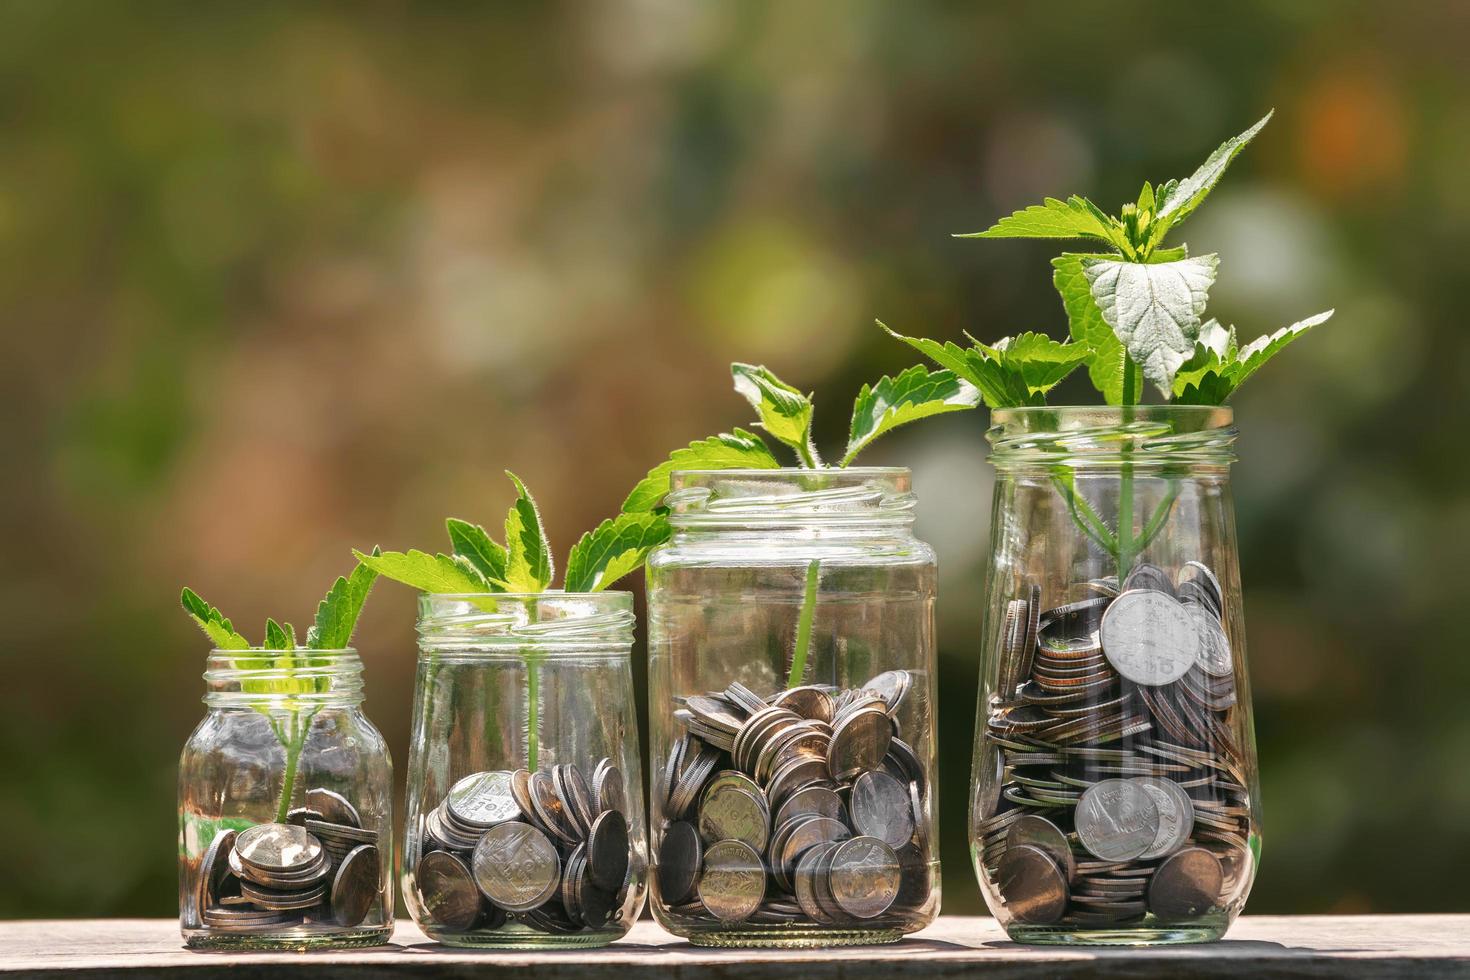 coins in four jug glass with plant grow step on wood. saving and growing money concept photo